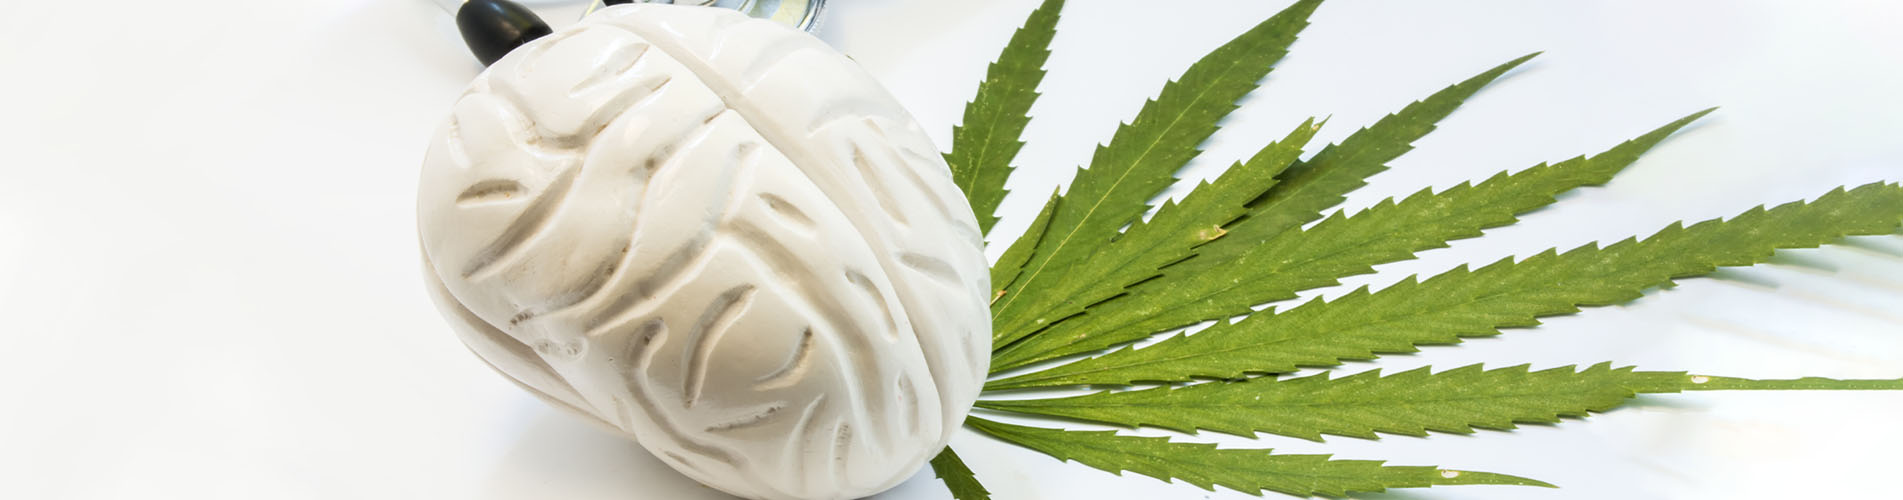 Cannabis for Epilepsy: Is It a Treatment or a Hoax?